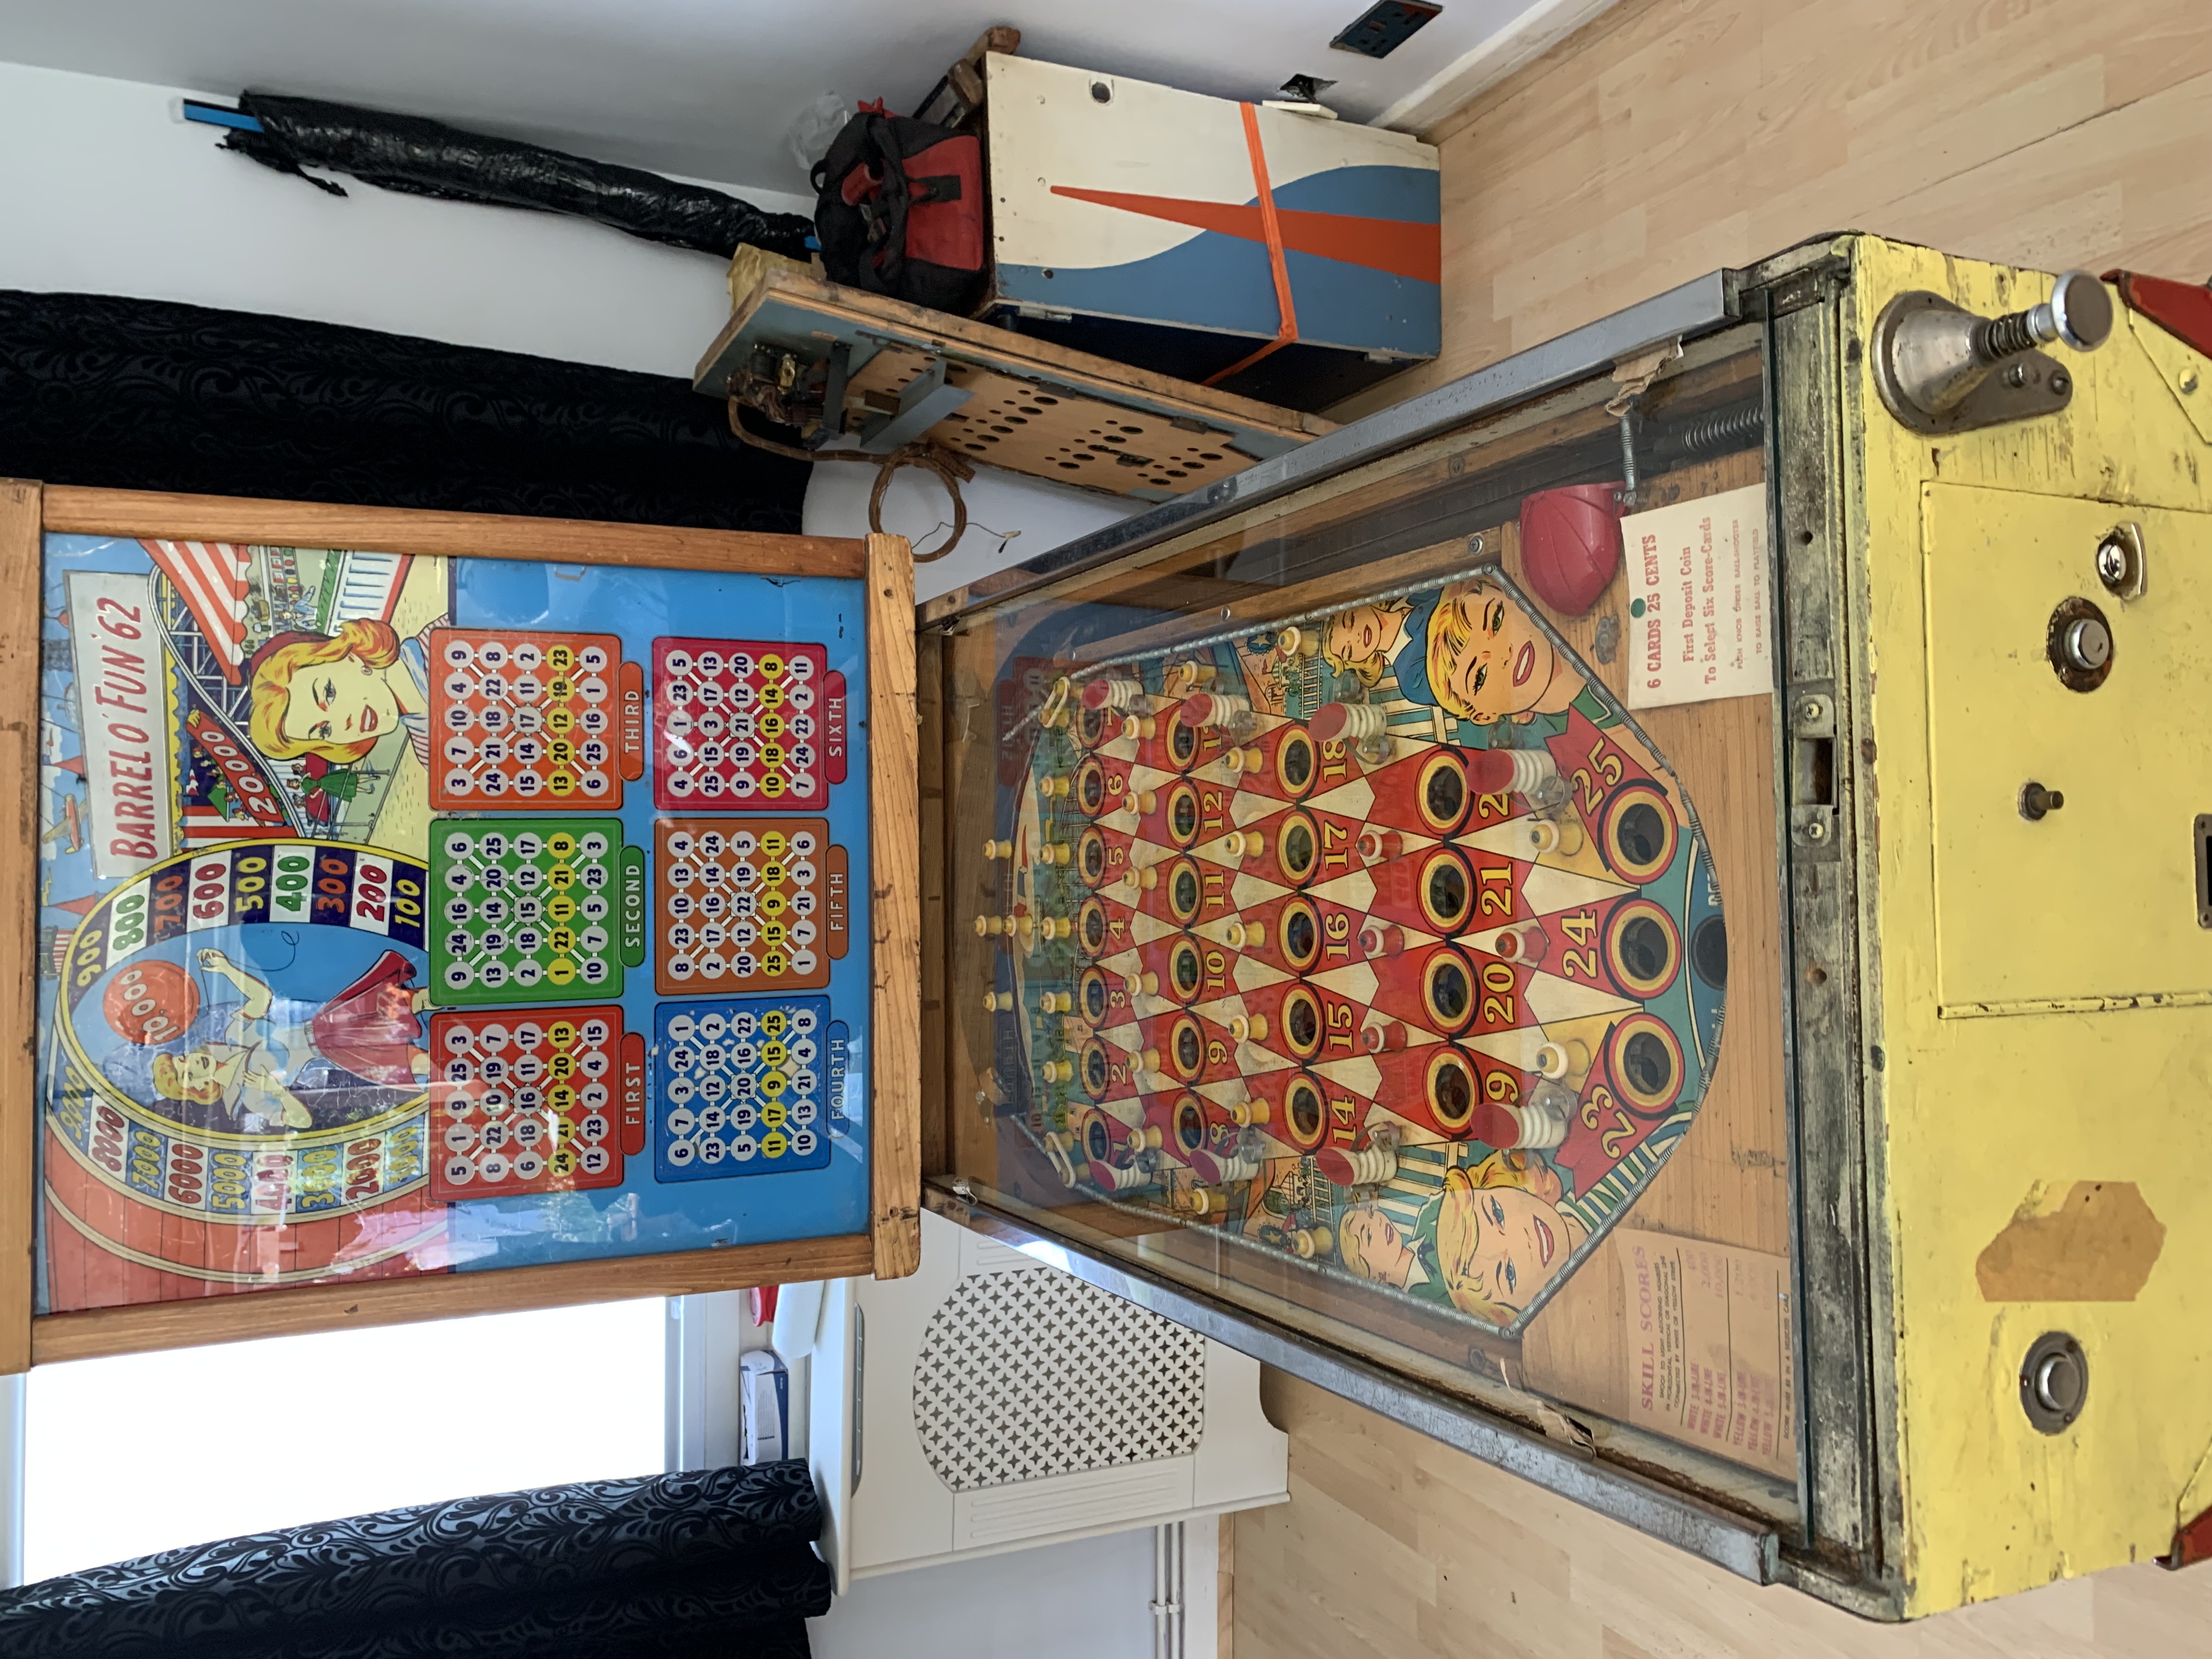 Bally Barrel ‘O’ Fun 62 – For Sale: Project machine with spares